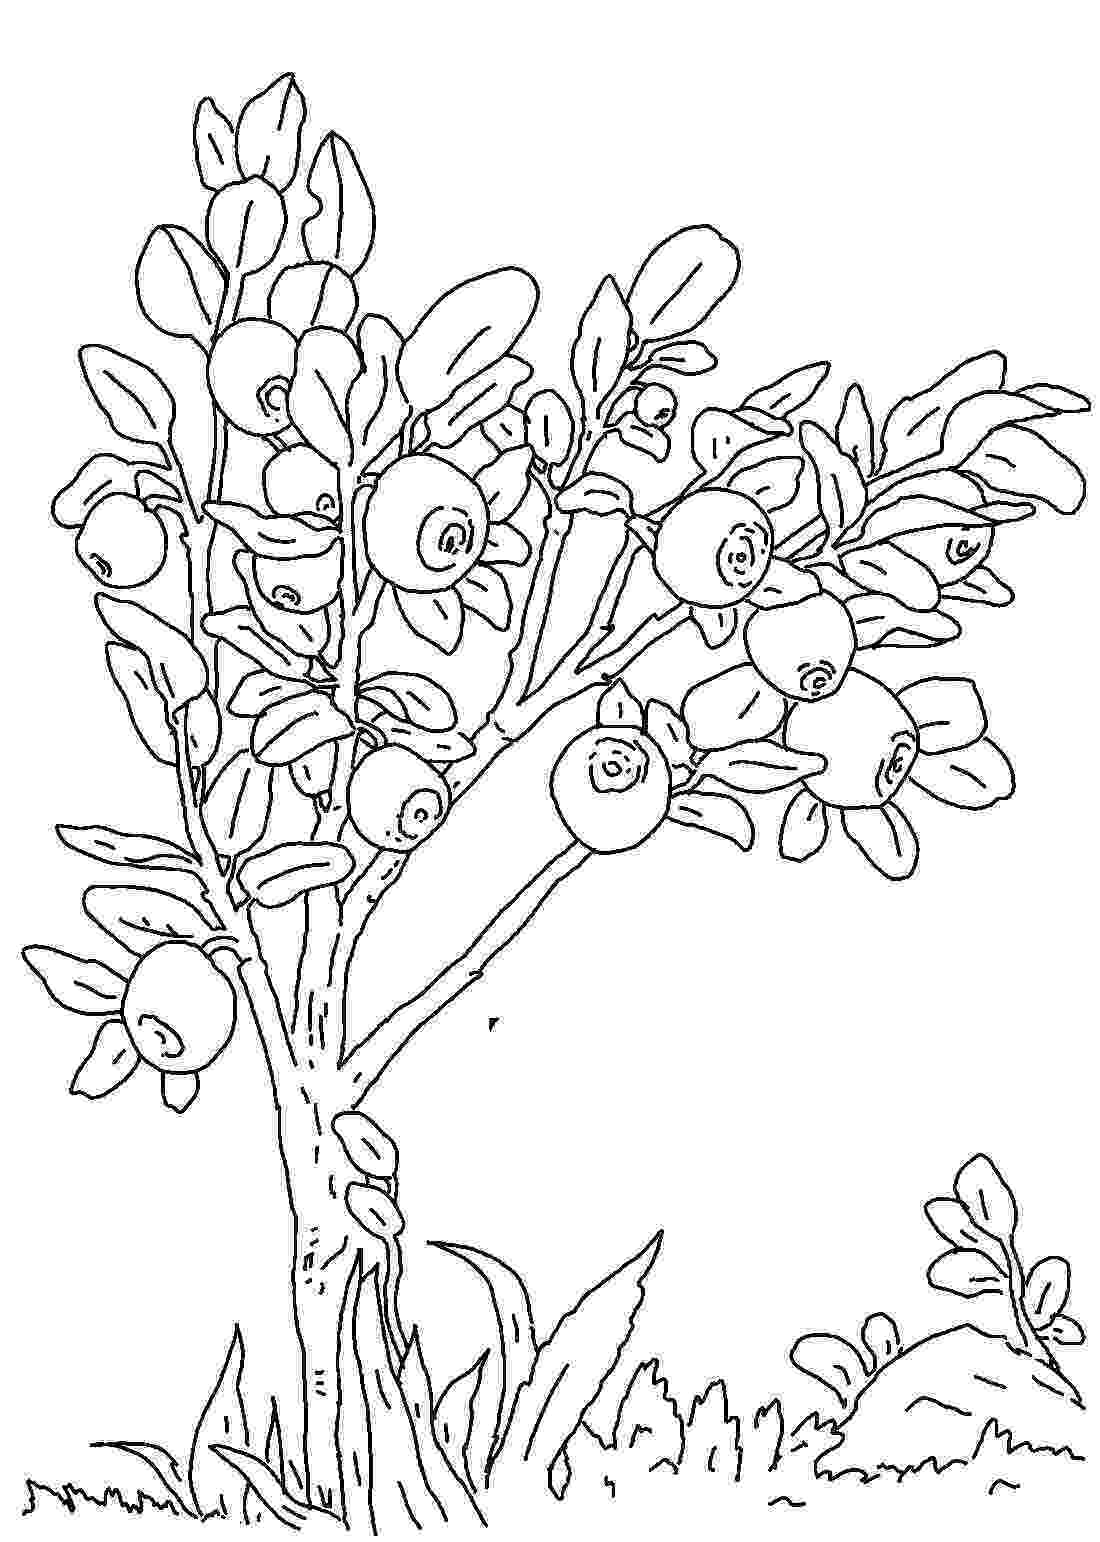 free coloring pages download blueberries coloring pages to download and print for free coloring pages free download 